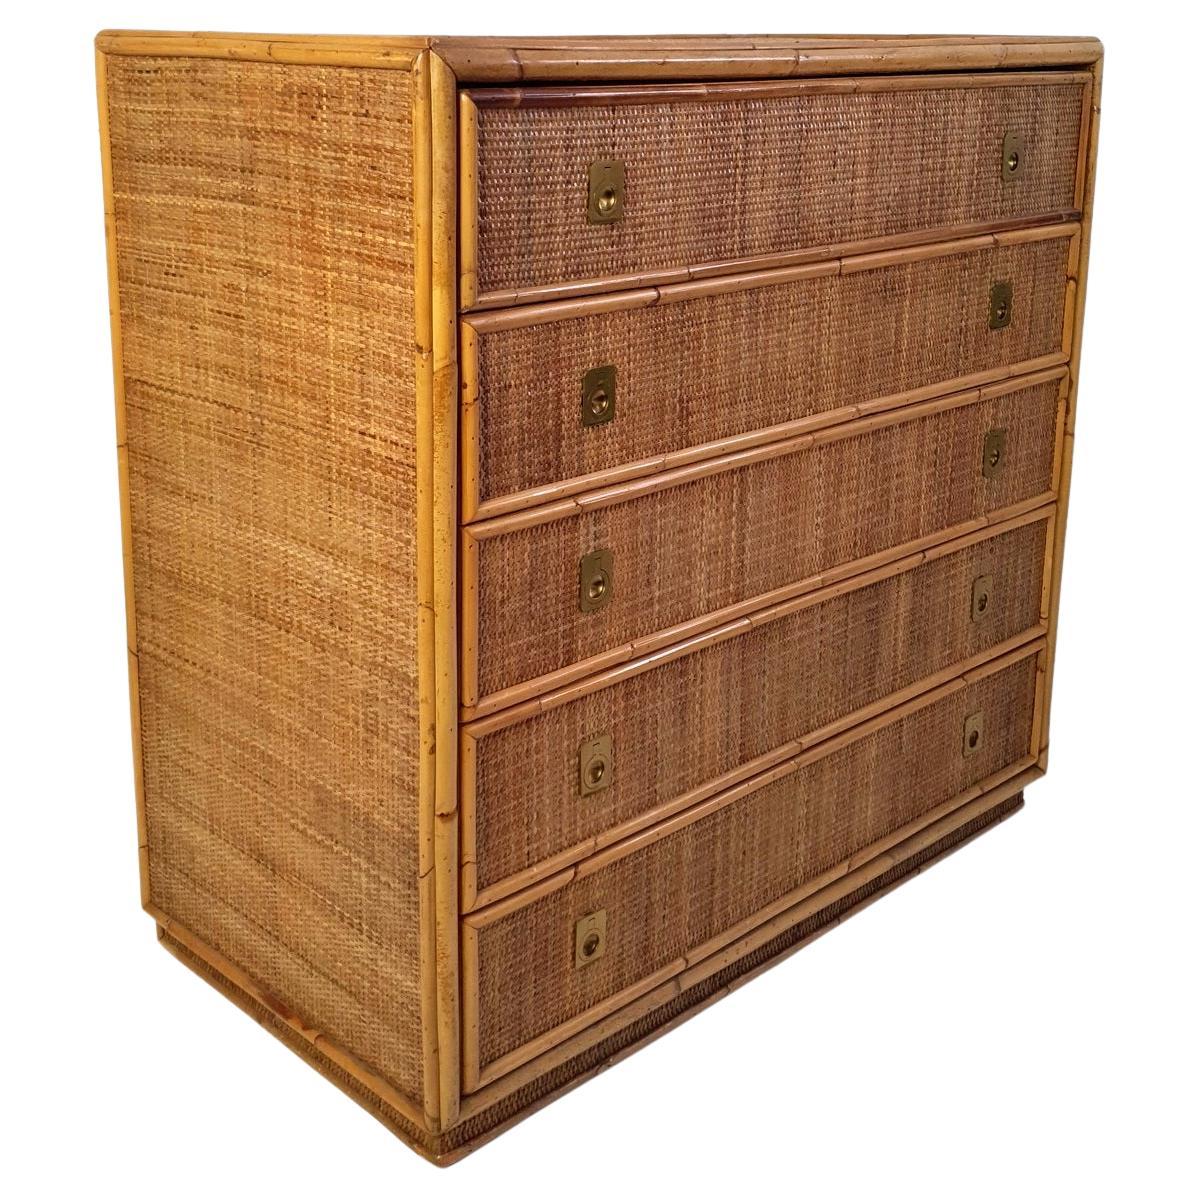 This is a bamboo and wicker dresser from the 1970's by Italian brand Vivai del Sud. It comes with five spacious drawers and smart brass fittings. In very nice condition and of high quality production.

Brothers Giorgio, Gianfranco and Piero di